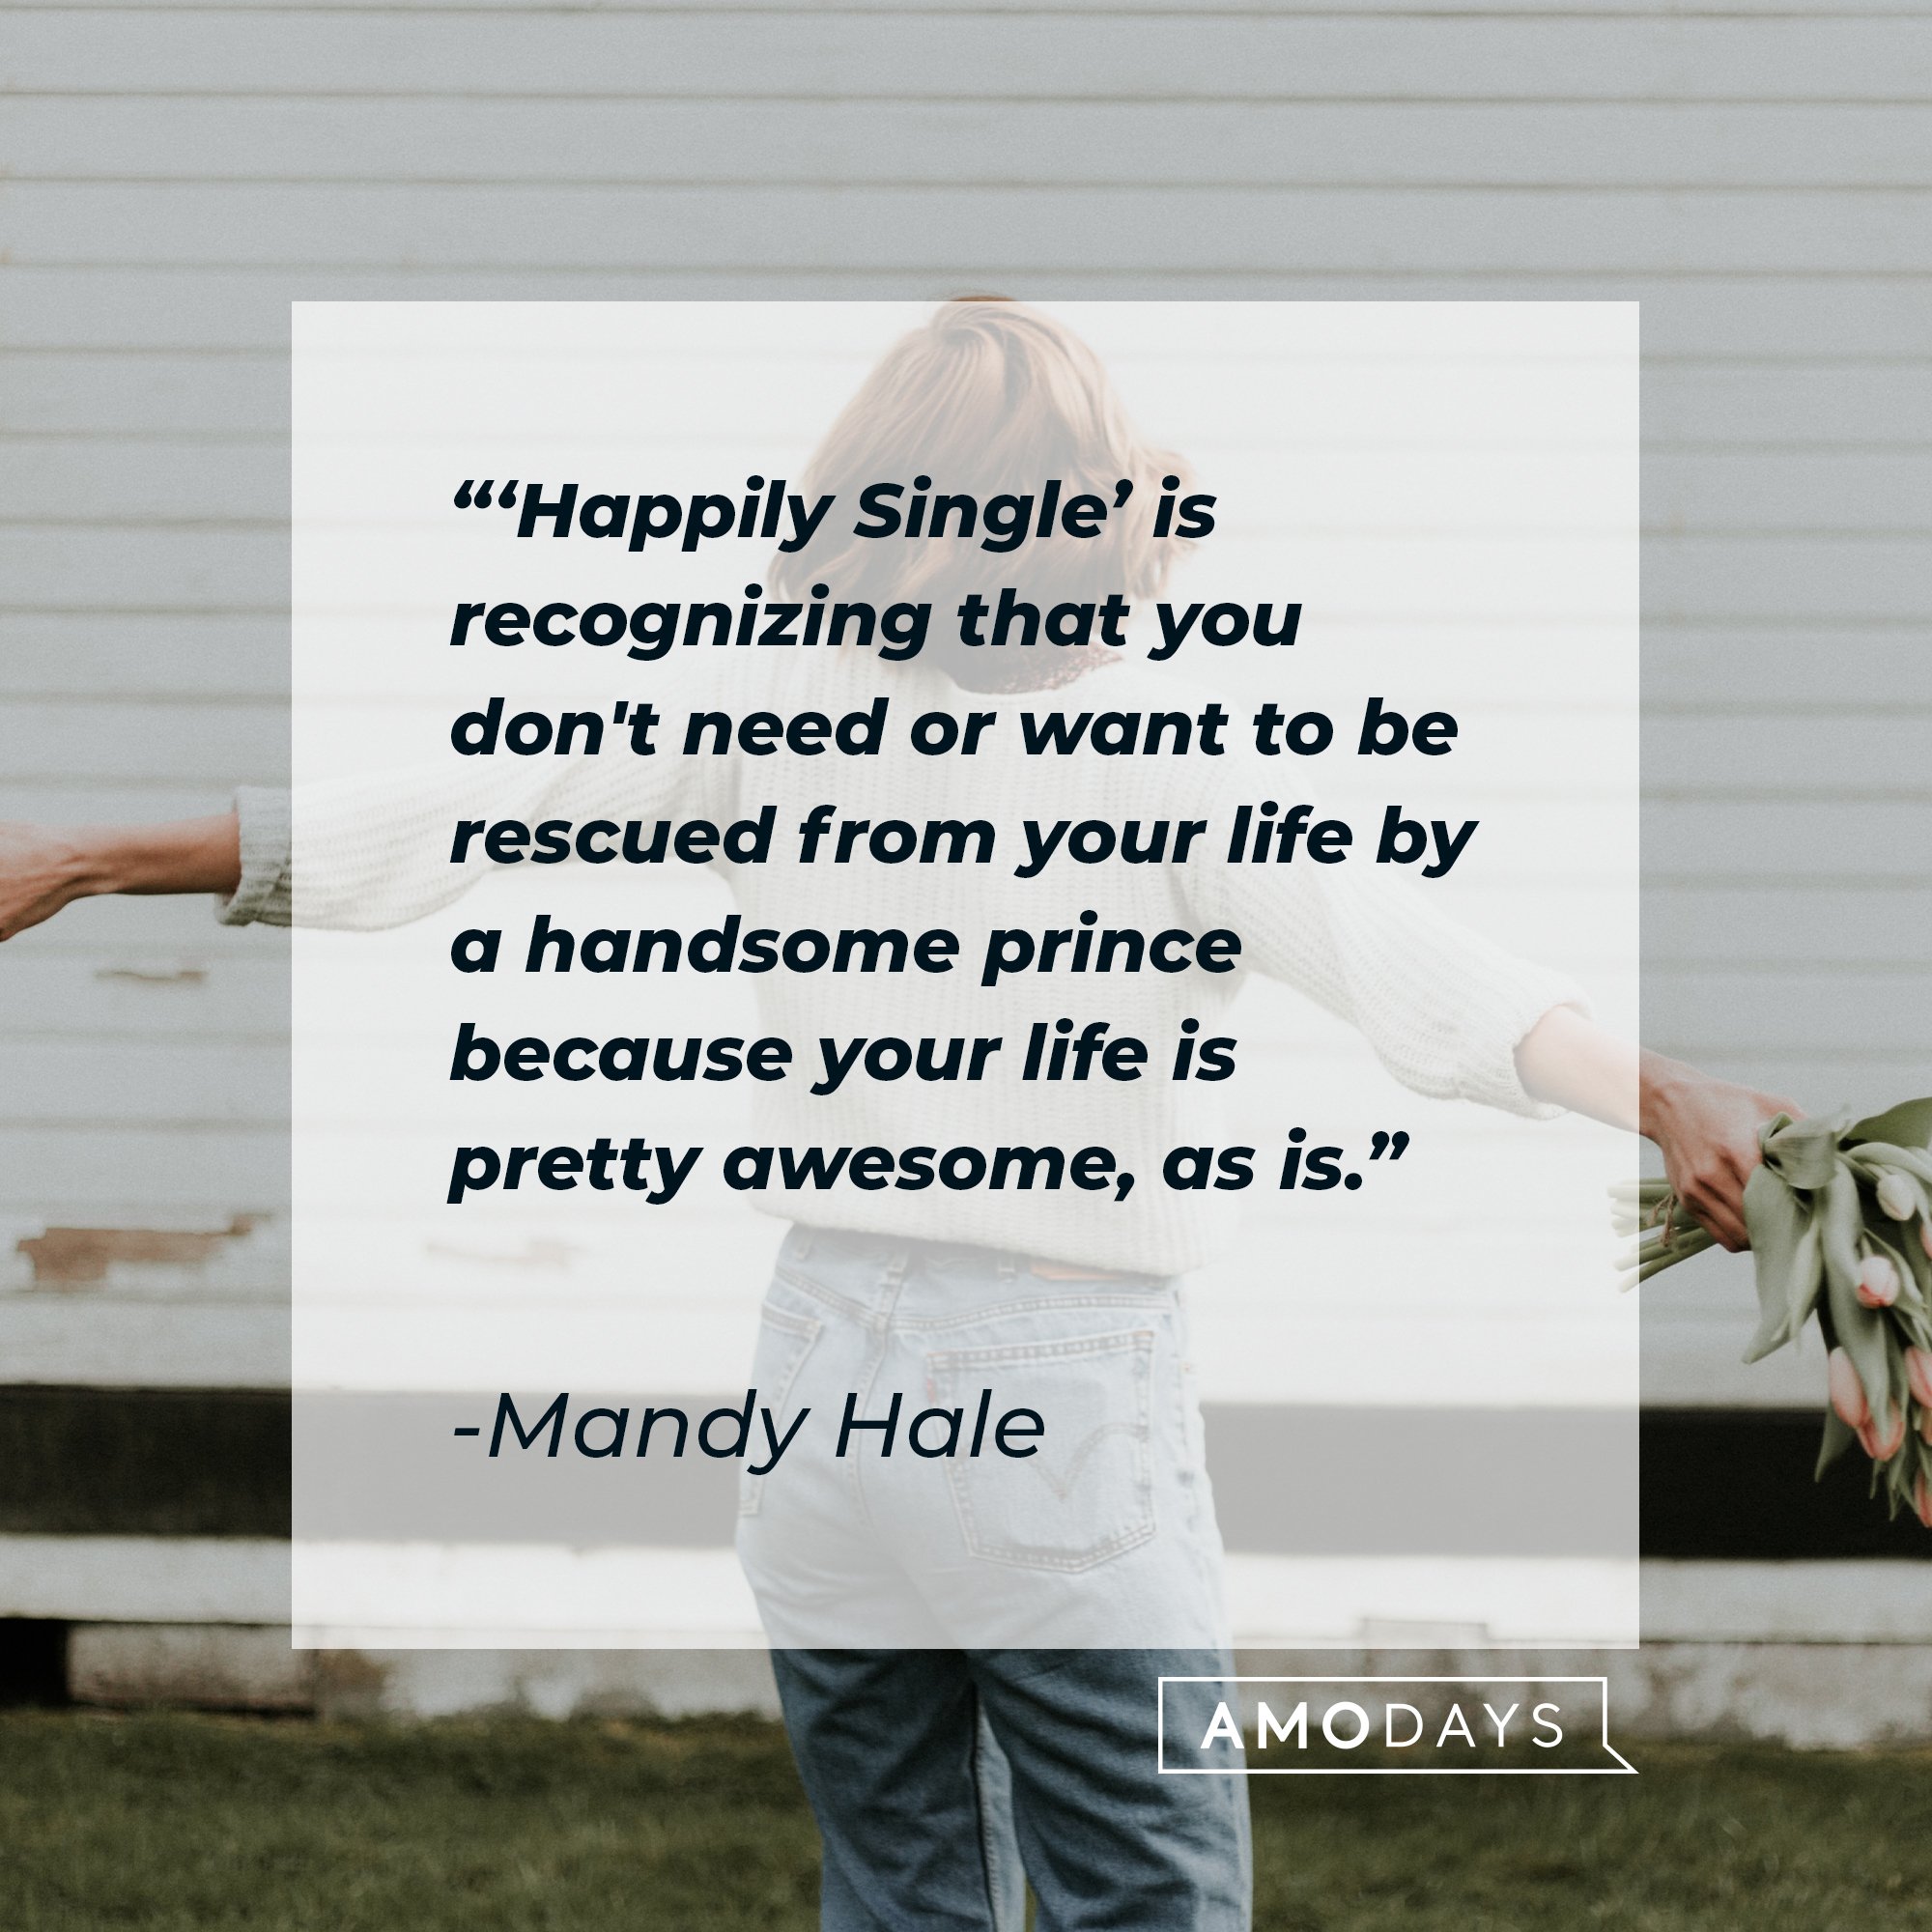 Mandy Hale’s quote: "'Happily Single' is recognizing that you don't need or want to be rescued from your life by a handsome prince because your life is pretty awesome, as is." | Image: AmoDays